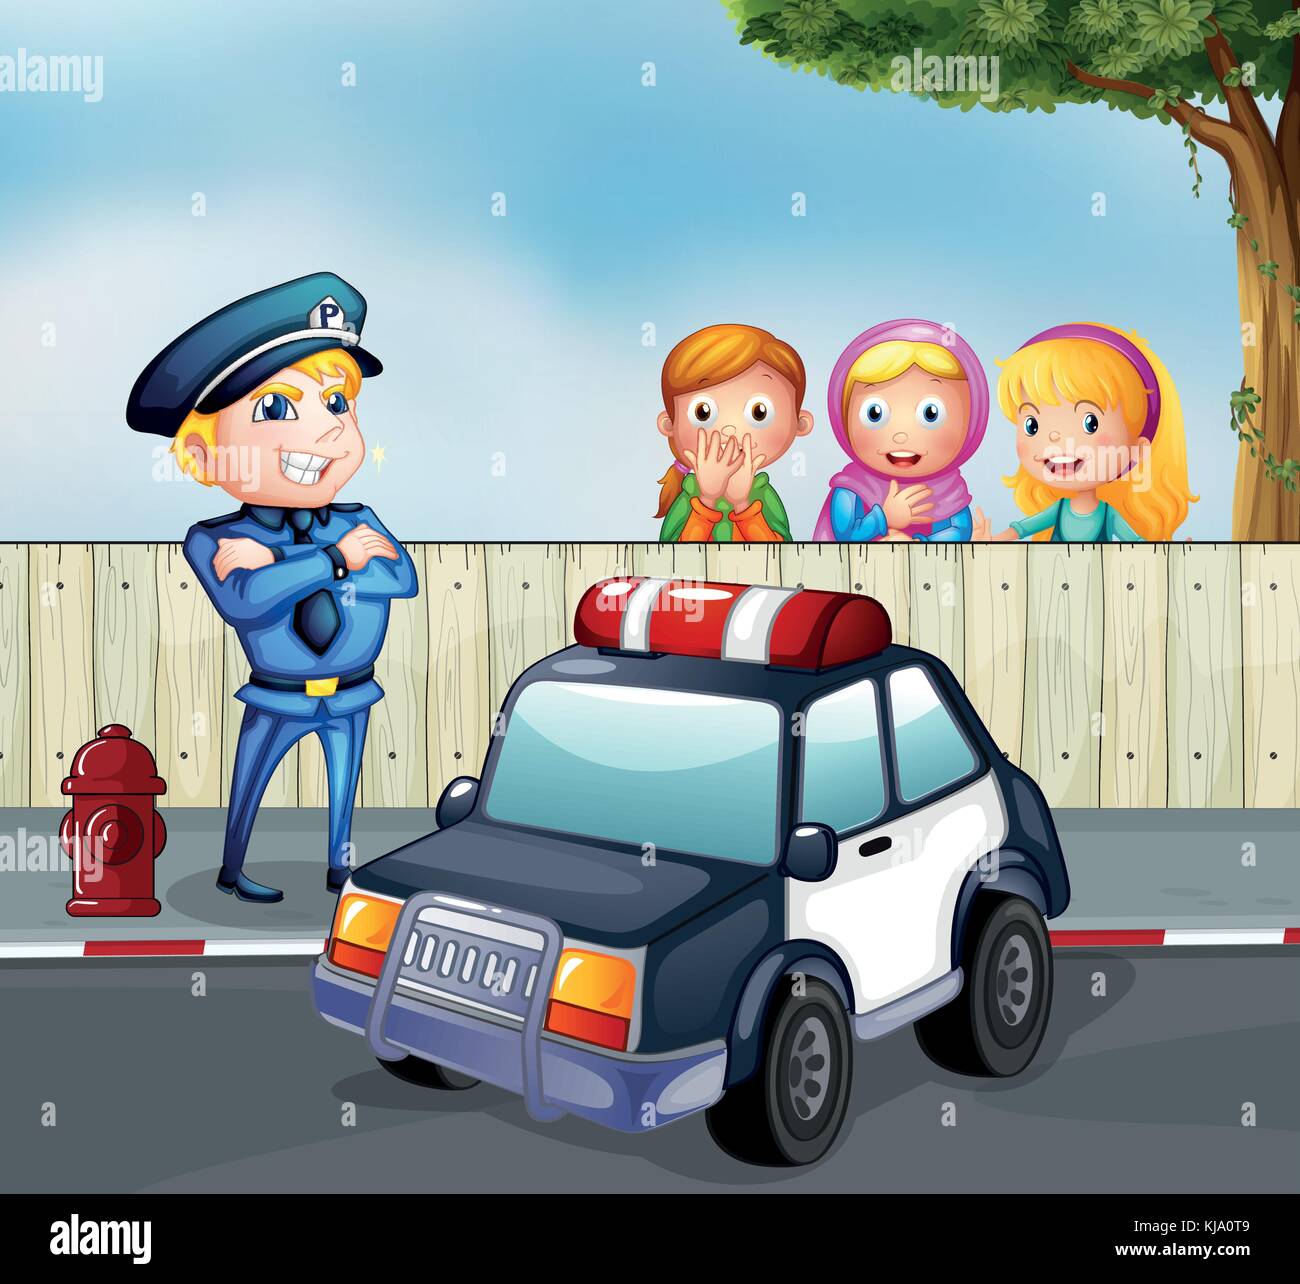 Illustration of a policeman and the three girls outside the fence Stock Vector